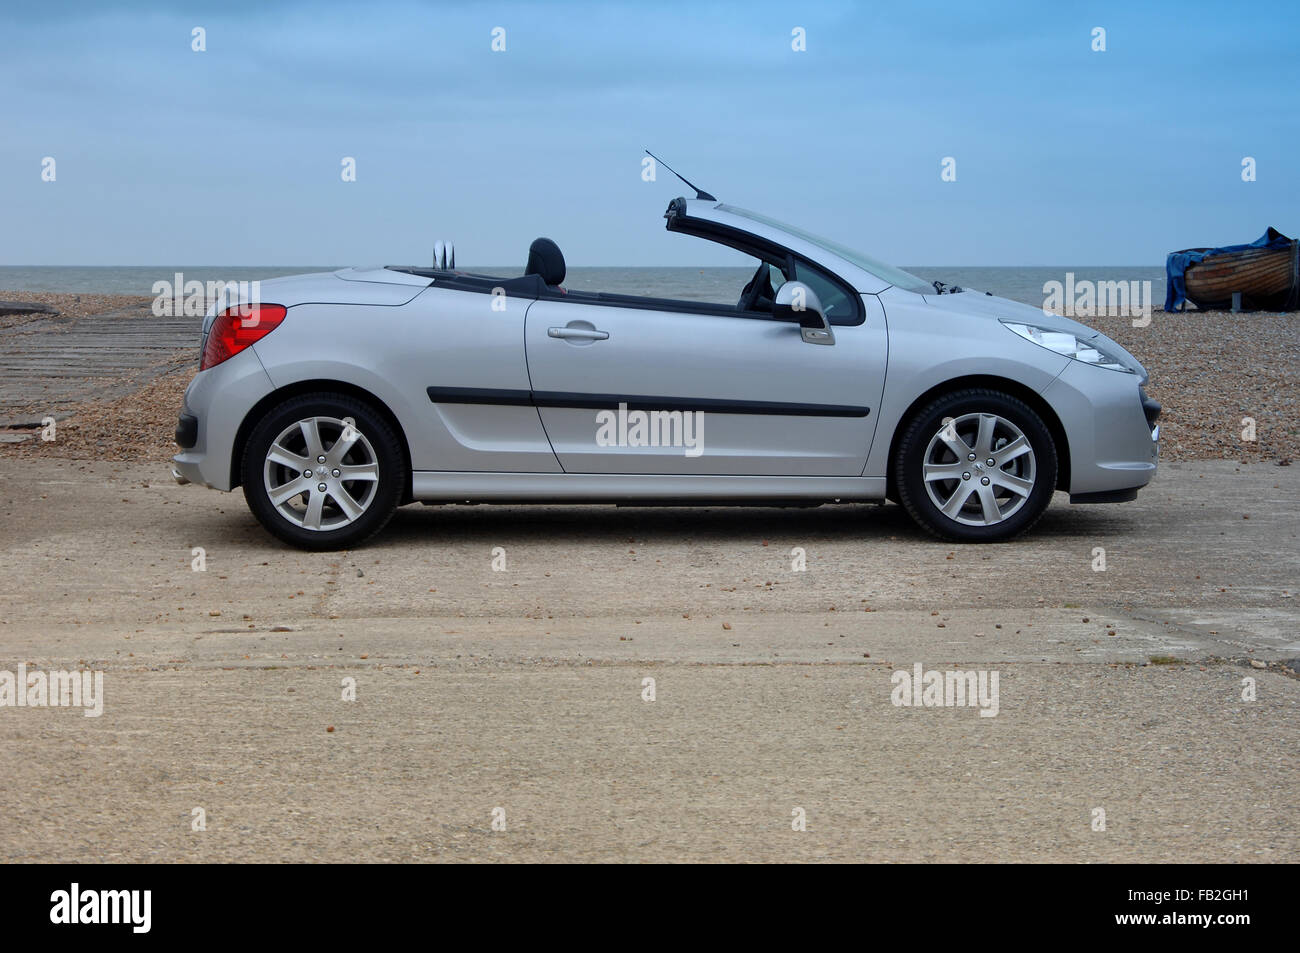 Peugeot 206 CC (Coupe Convertible) open top car with folding metal roof Stock Photo